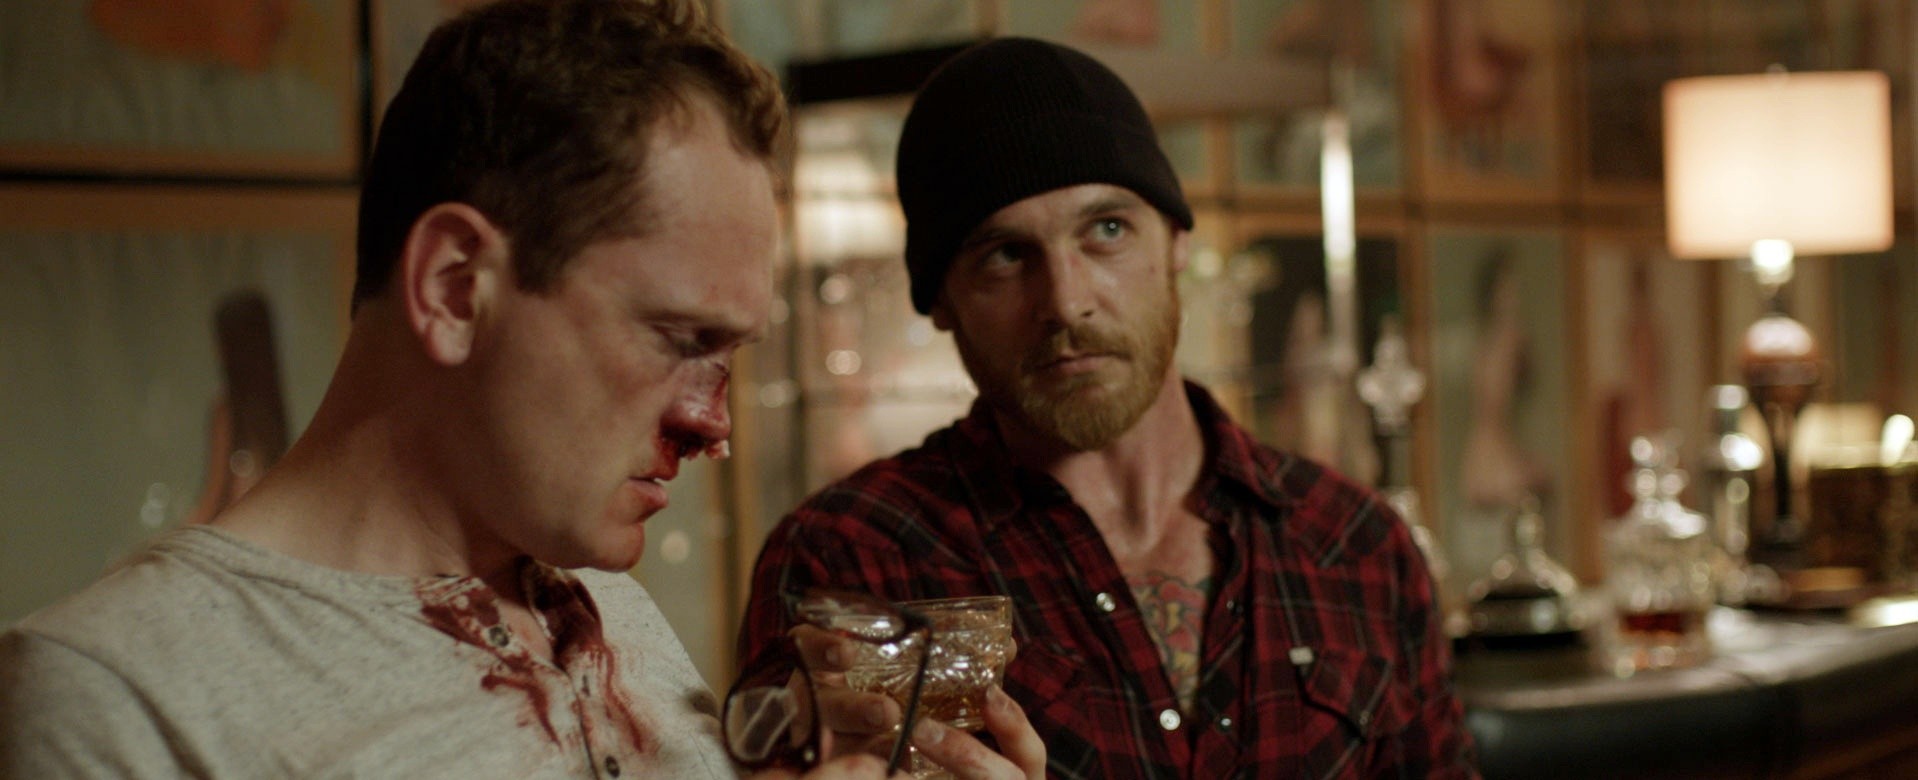 Pat Healy stars as Craig and  Ethan Embry stars as Vince in Drafthouse Films' Cheap Thrills (2014)